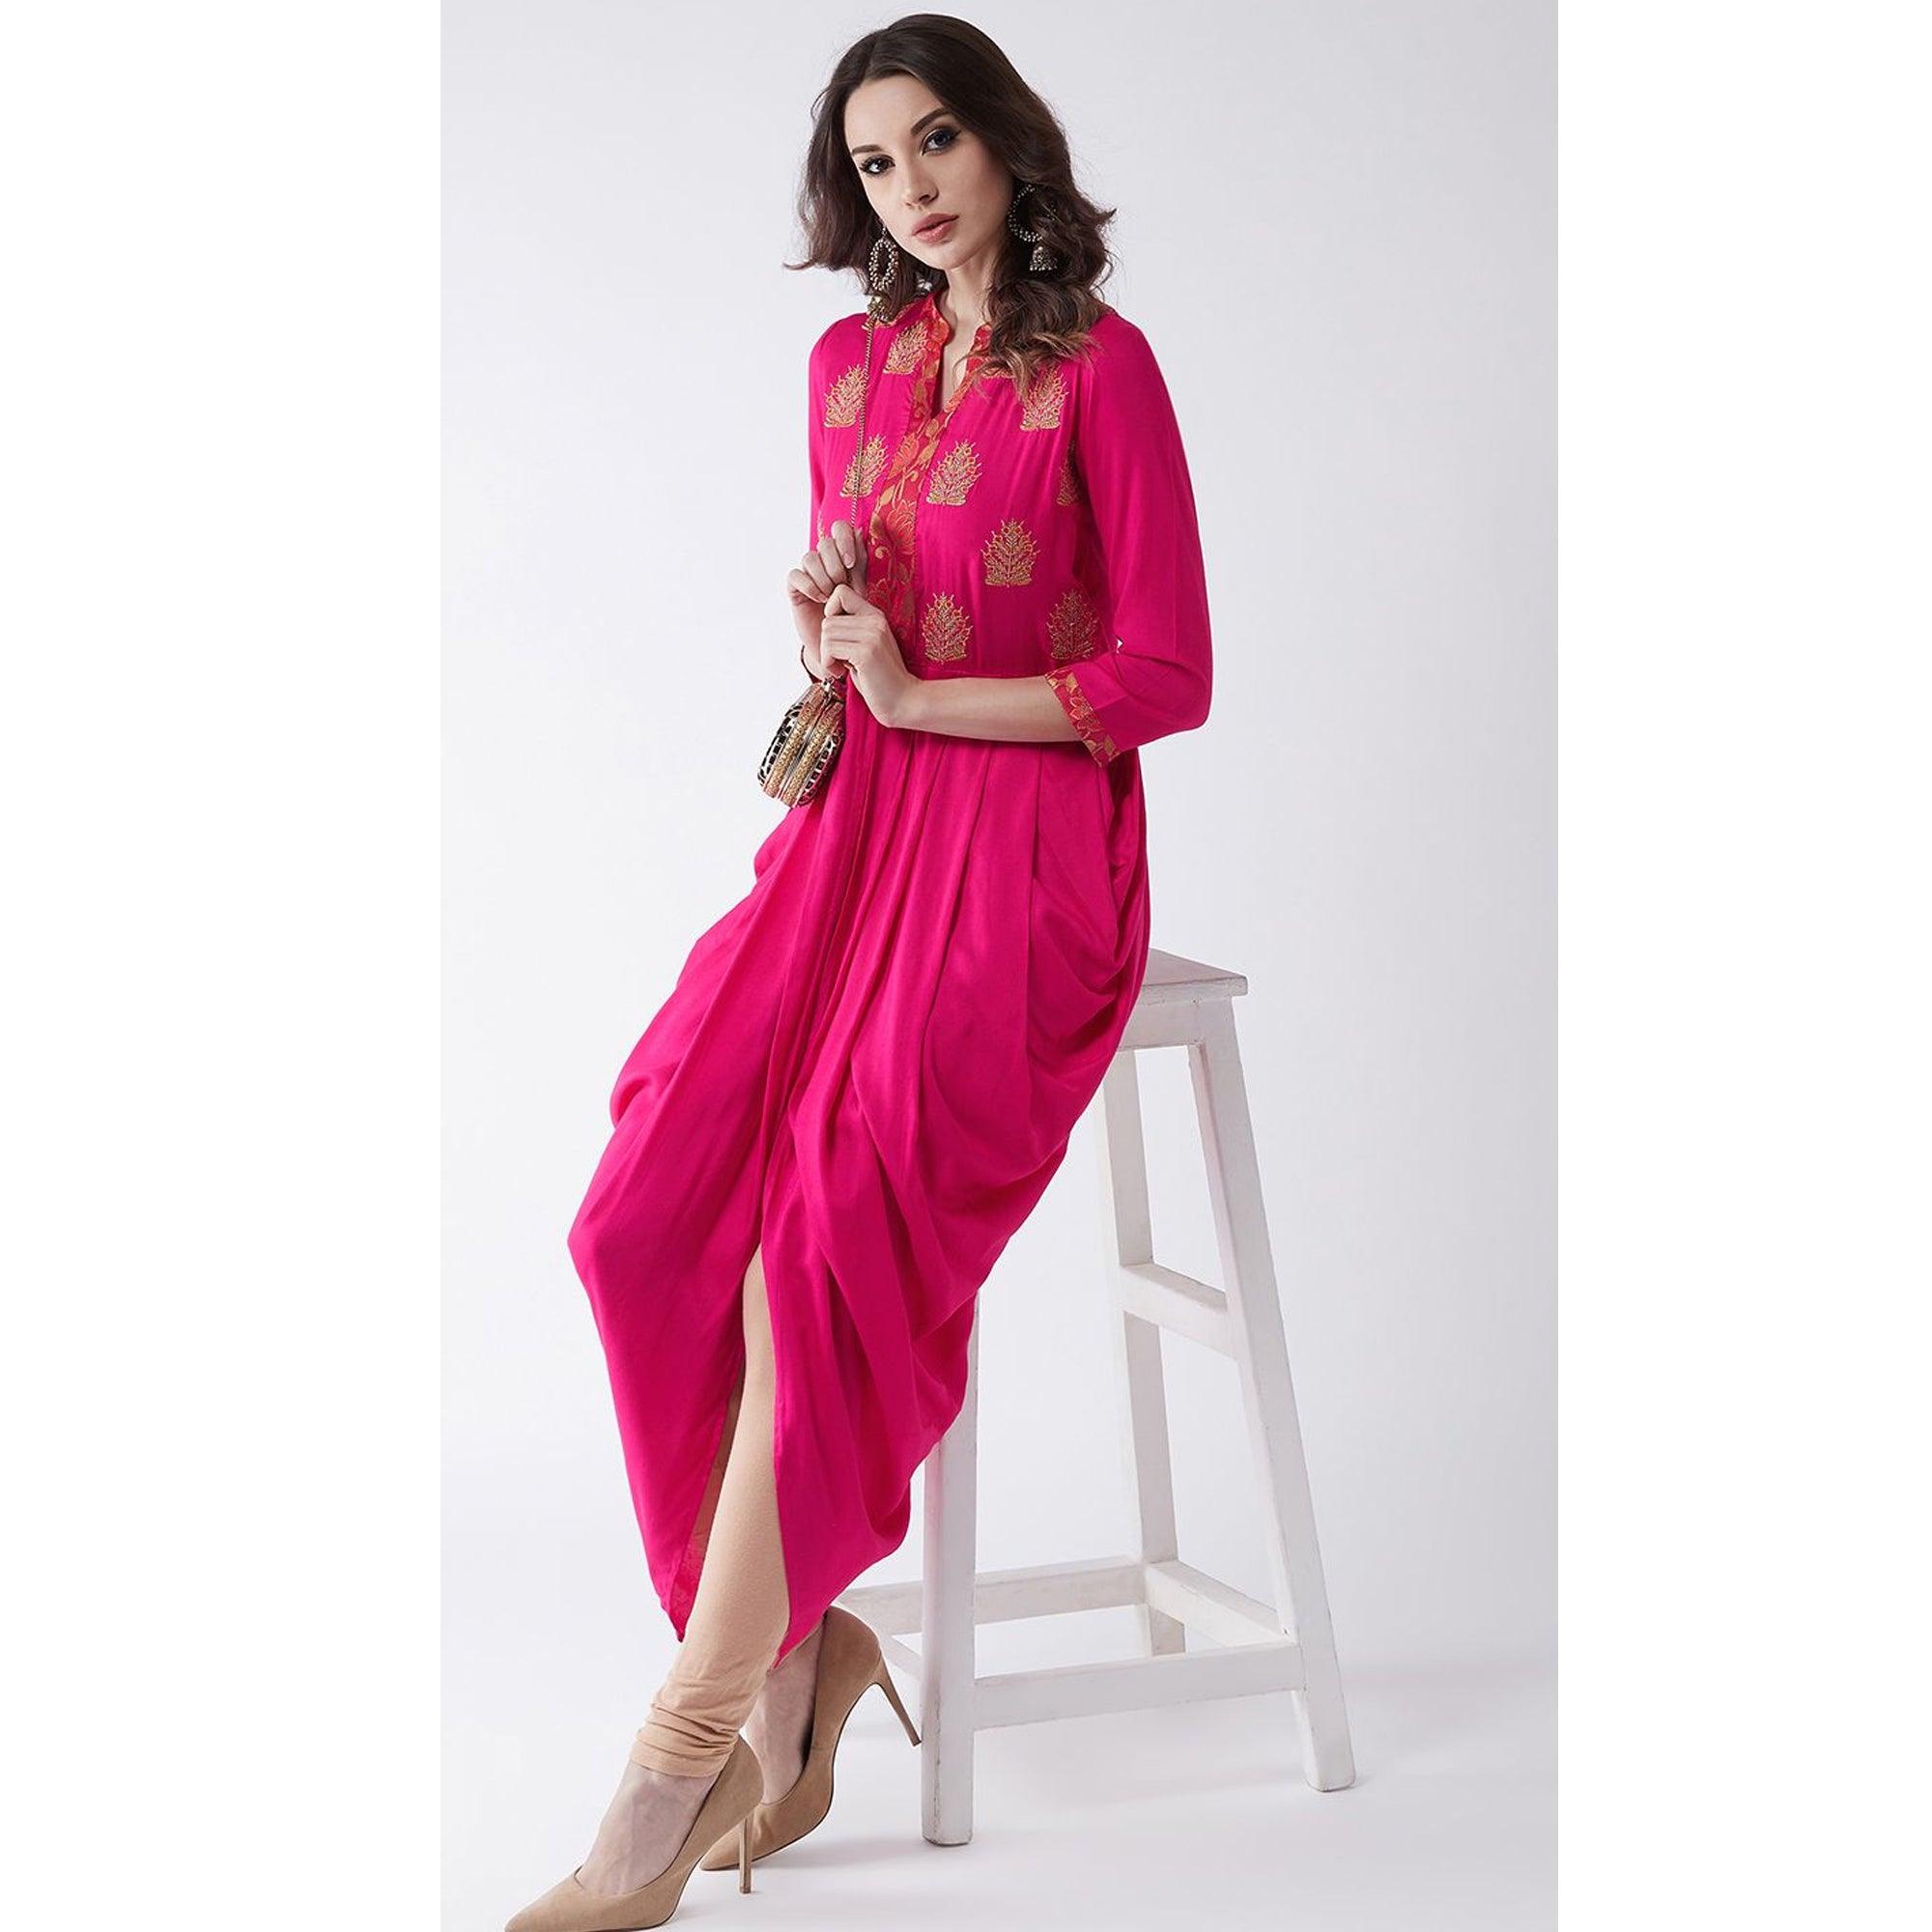 Pannkh - Women's Pink Colored Embroidered Rayon Cowl Kurti - Peachmode